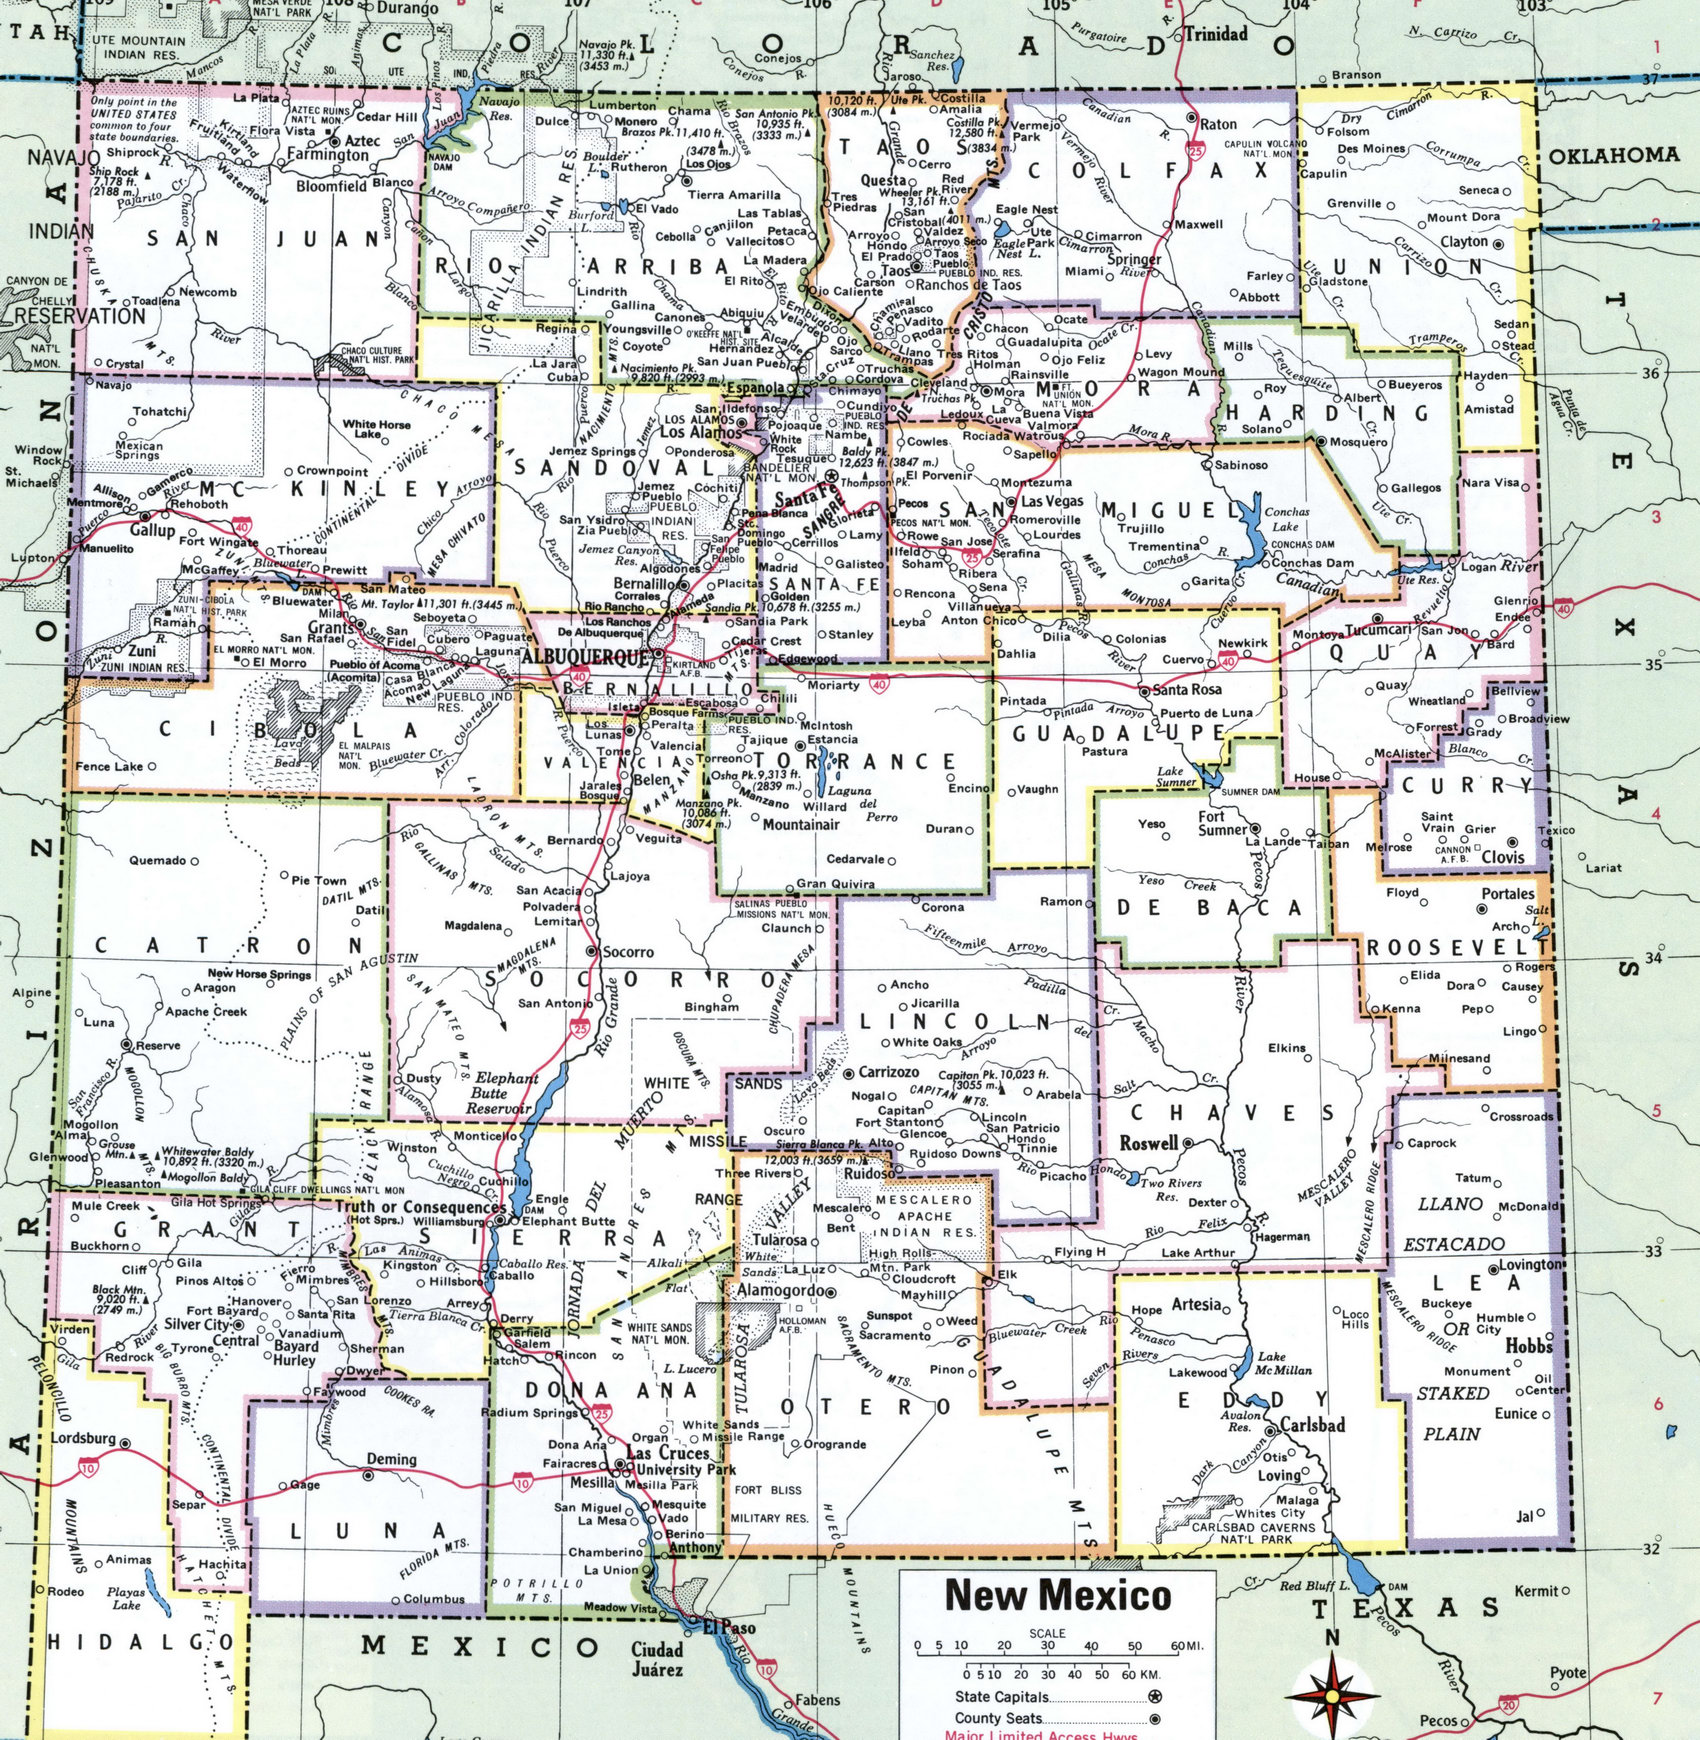 Map of New Mexico by county